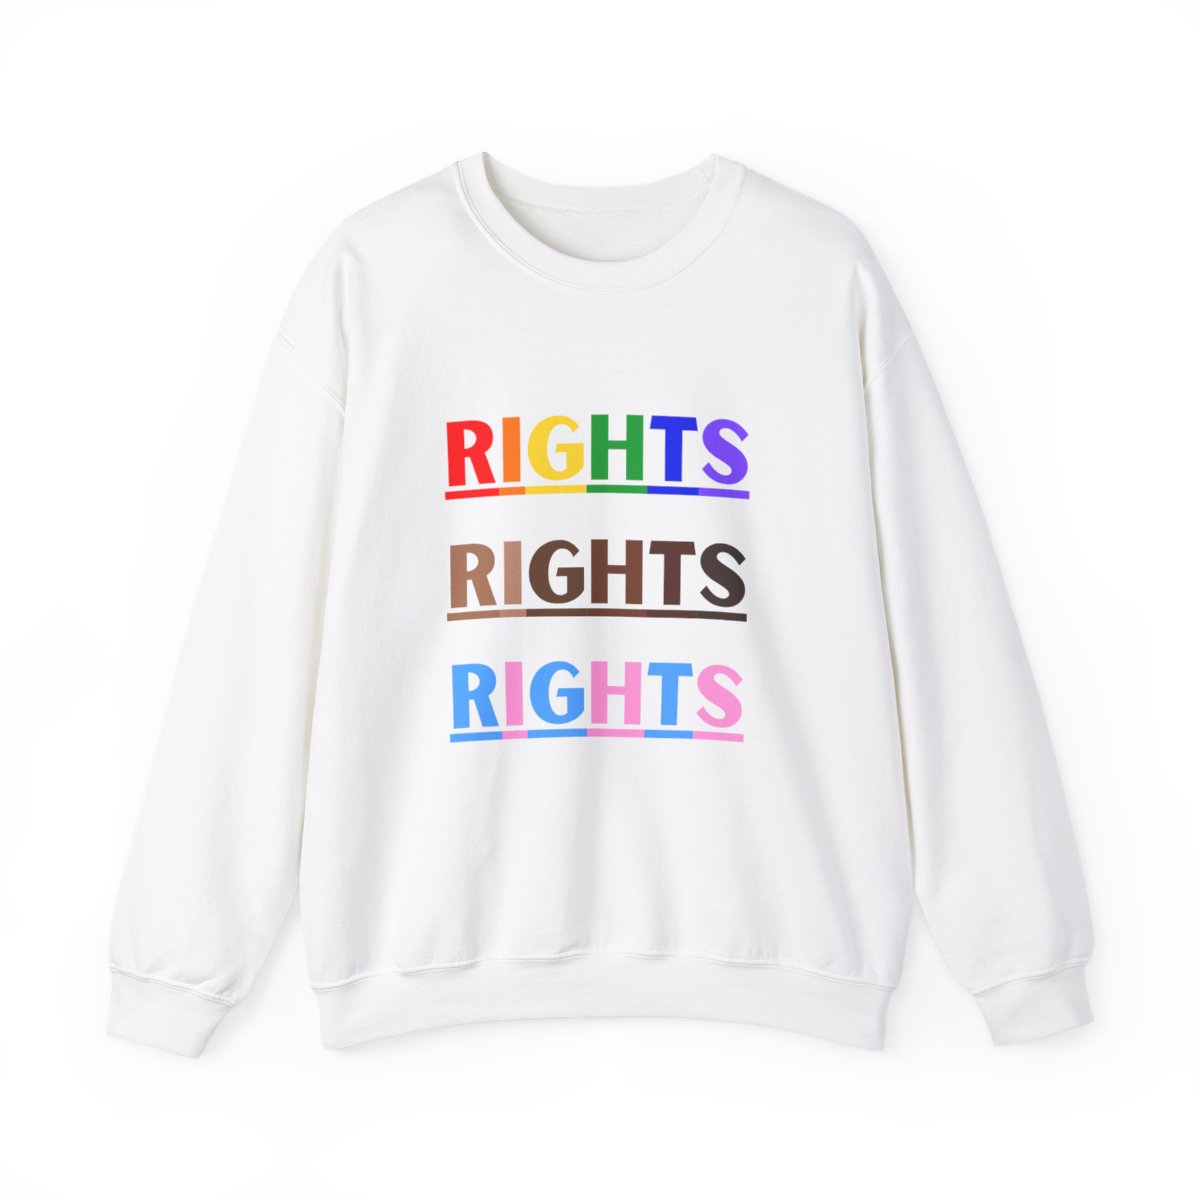 Rights, Rights, Rights Sweatshirts